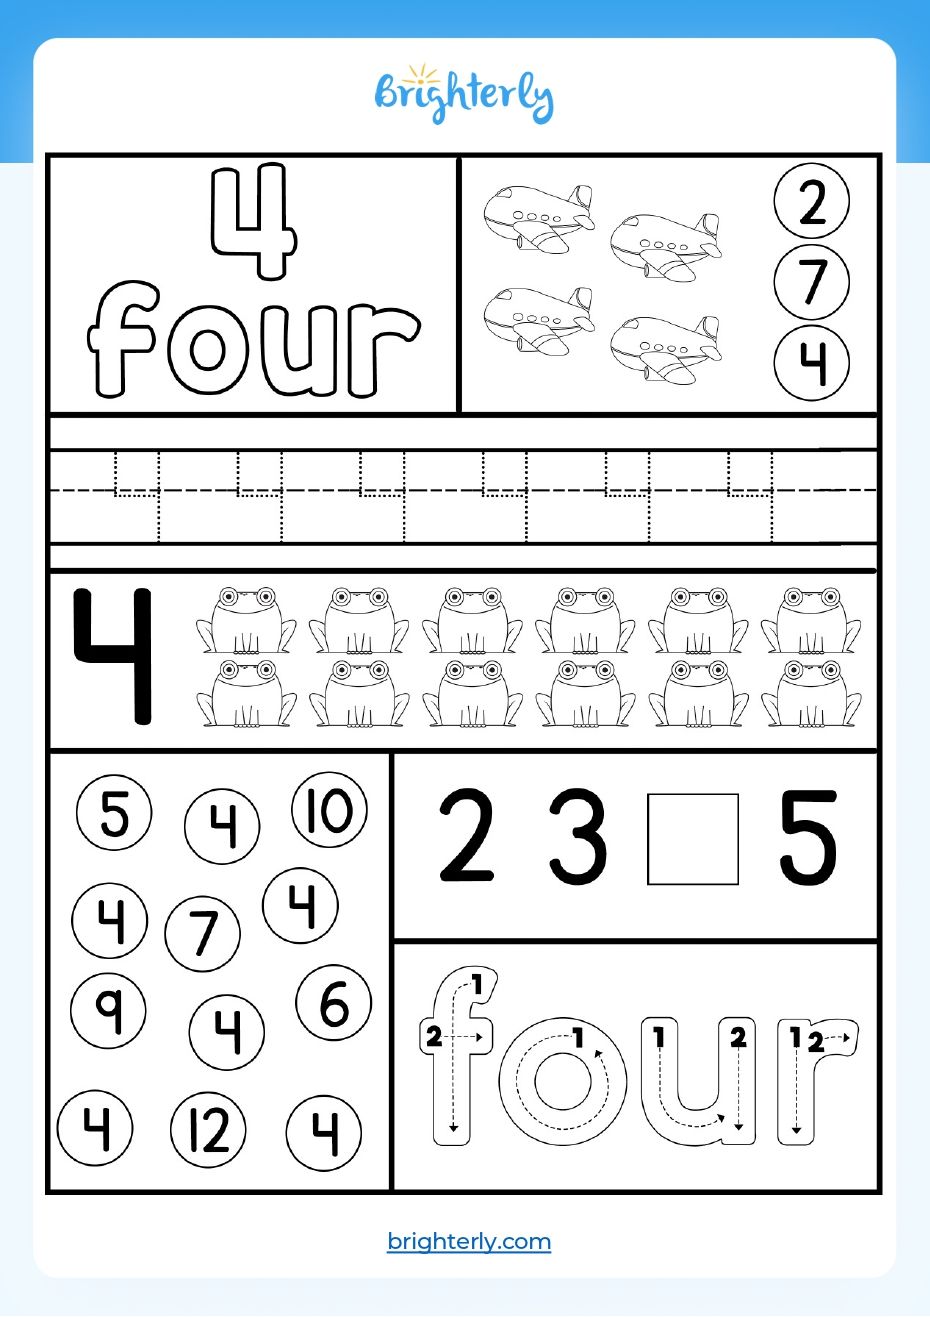 free-printable-number-4-four-worksheets-for-kids-pdfs-brighterly